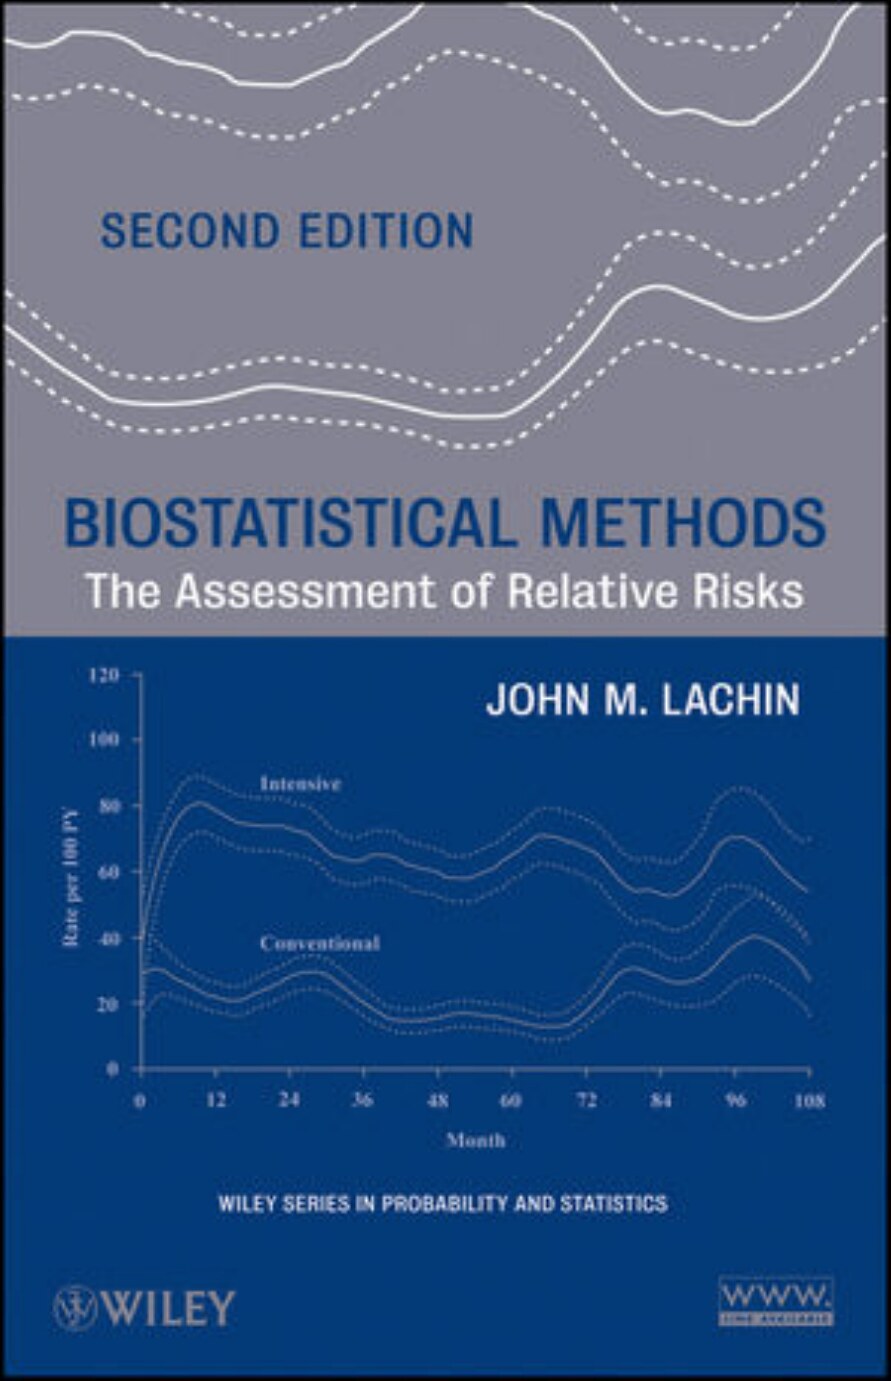 Biostatistical Methods - The Assessment of Relative Risks (second edition)